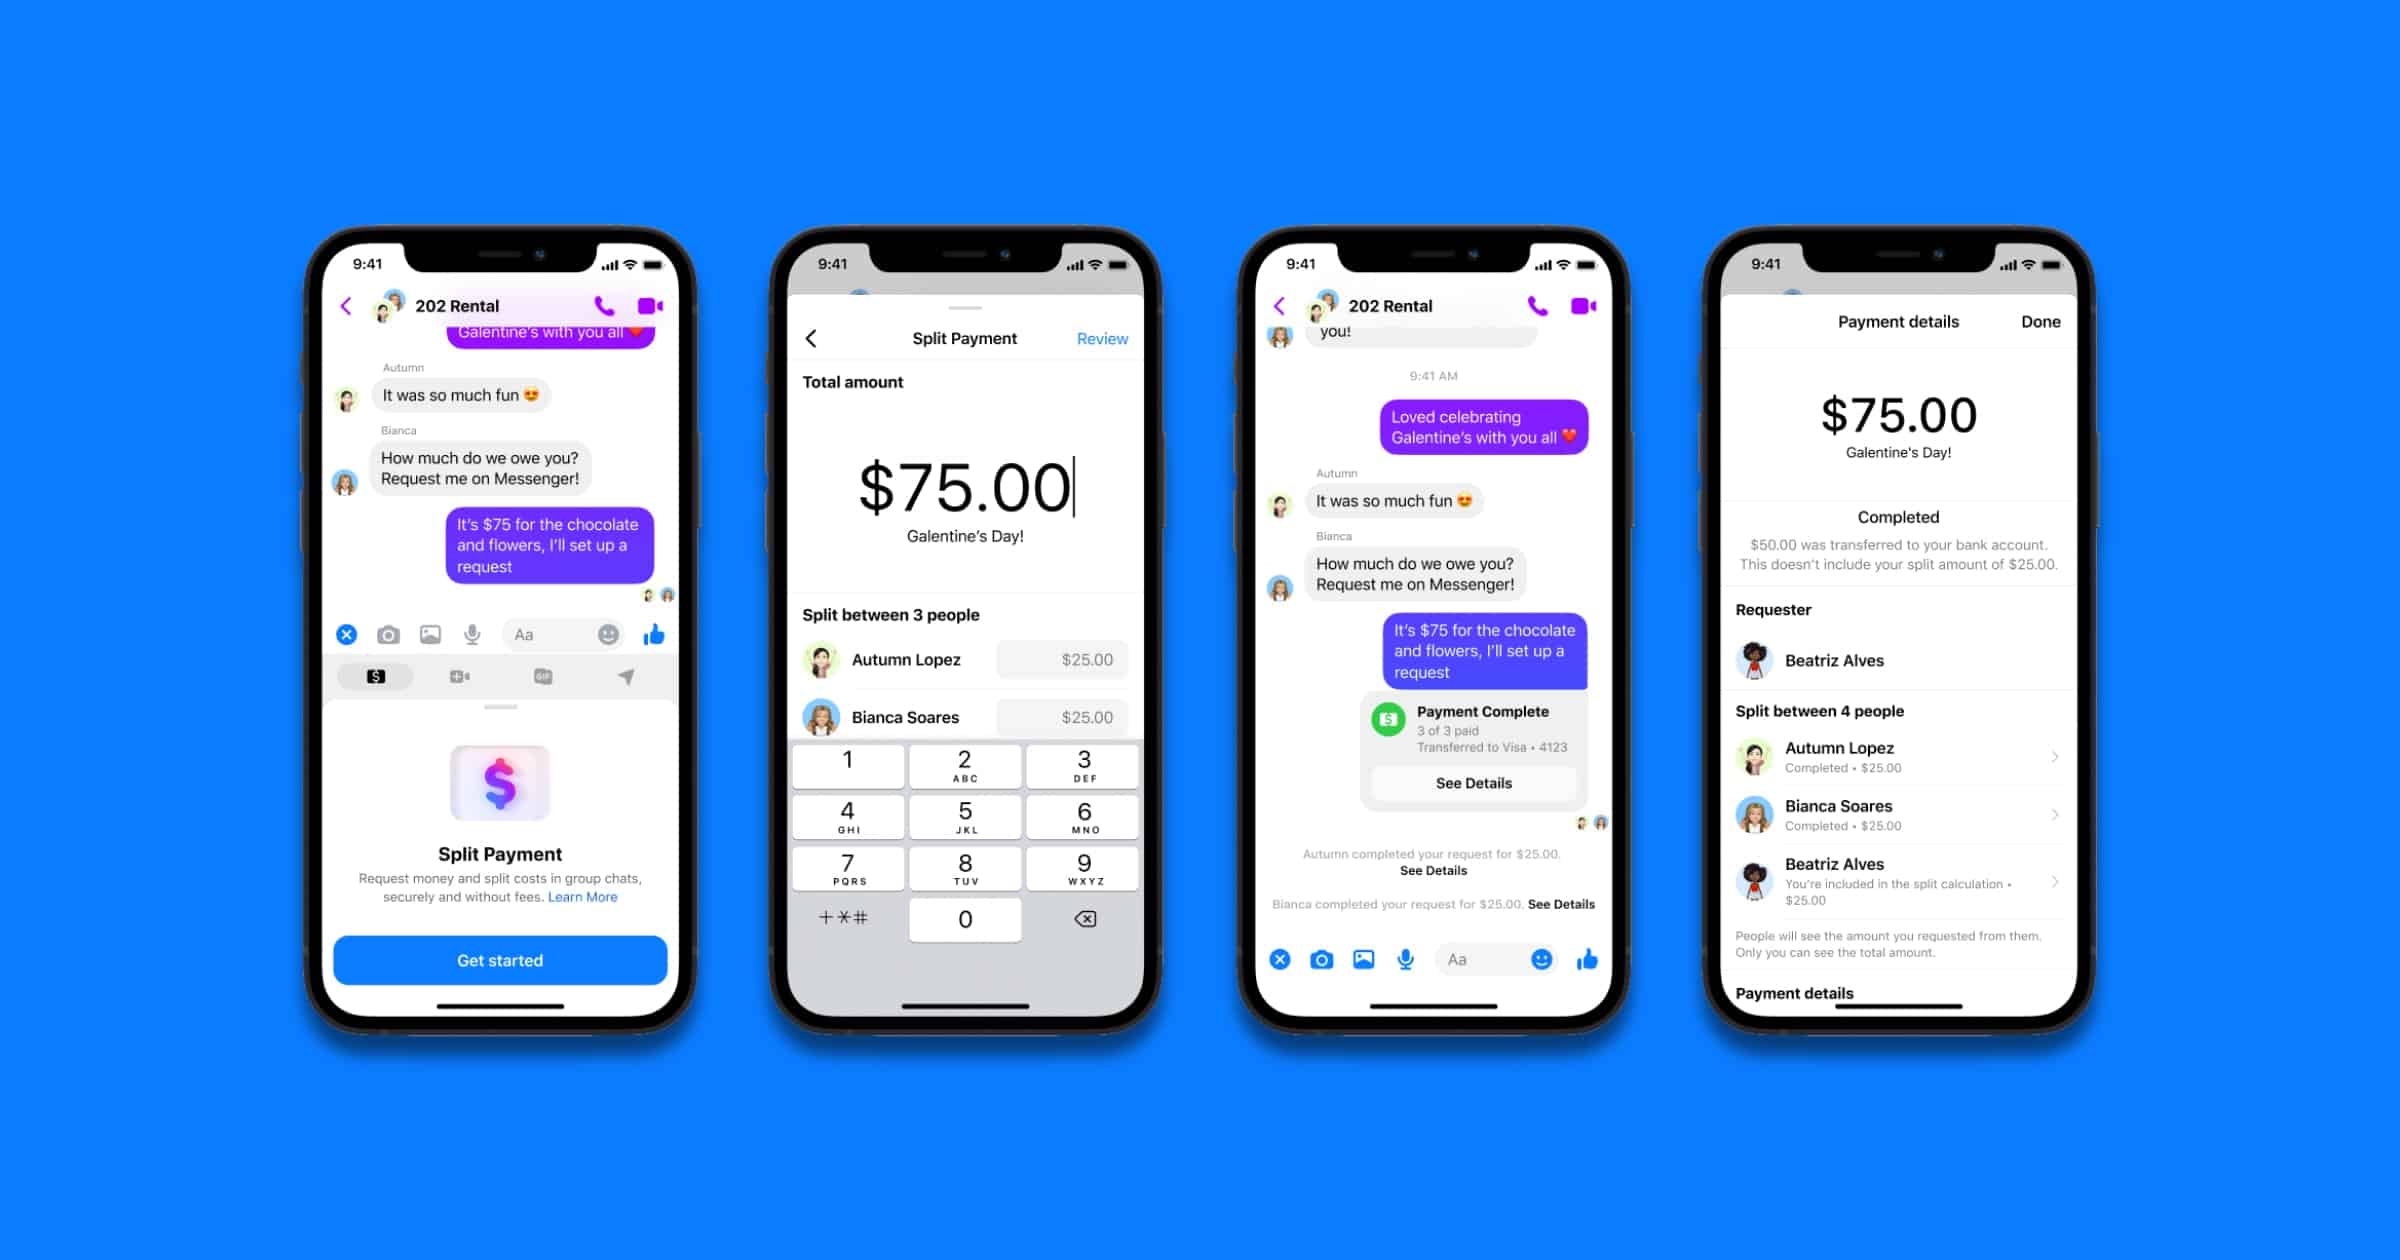 Split Payments in Messenger Rolls Out to Facebook Users